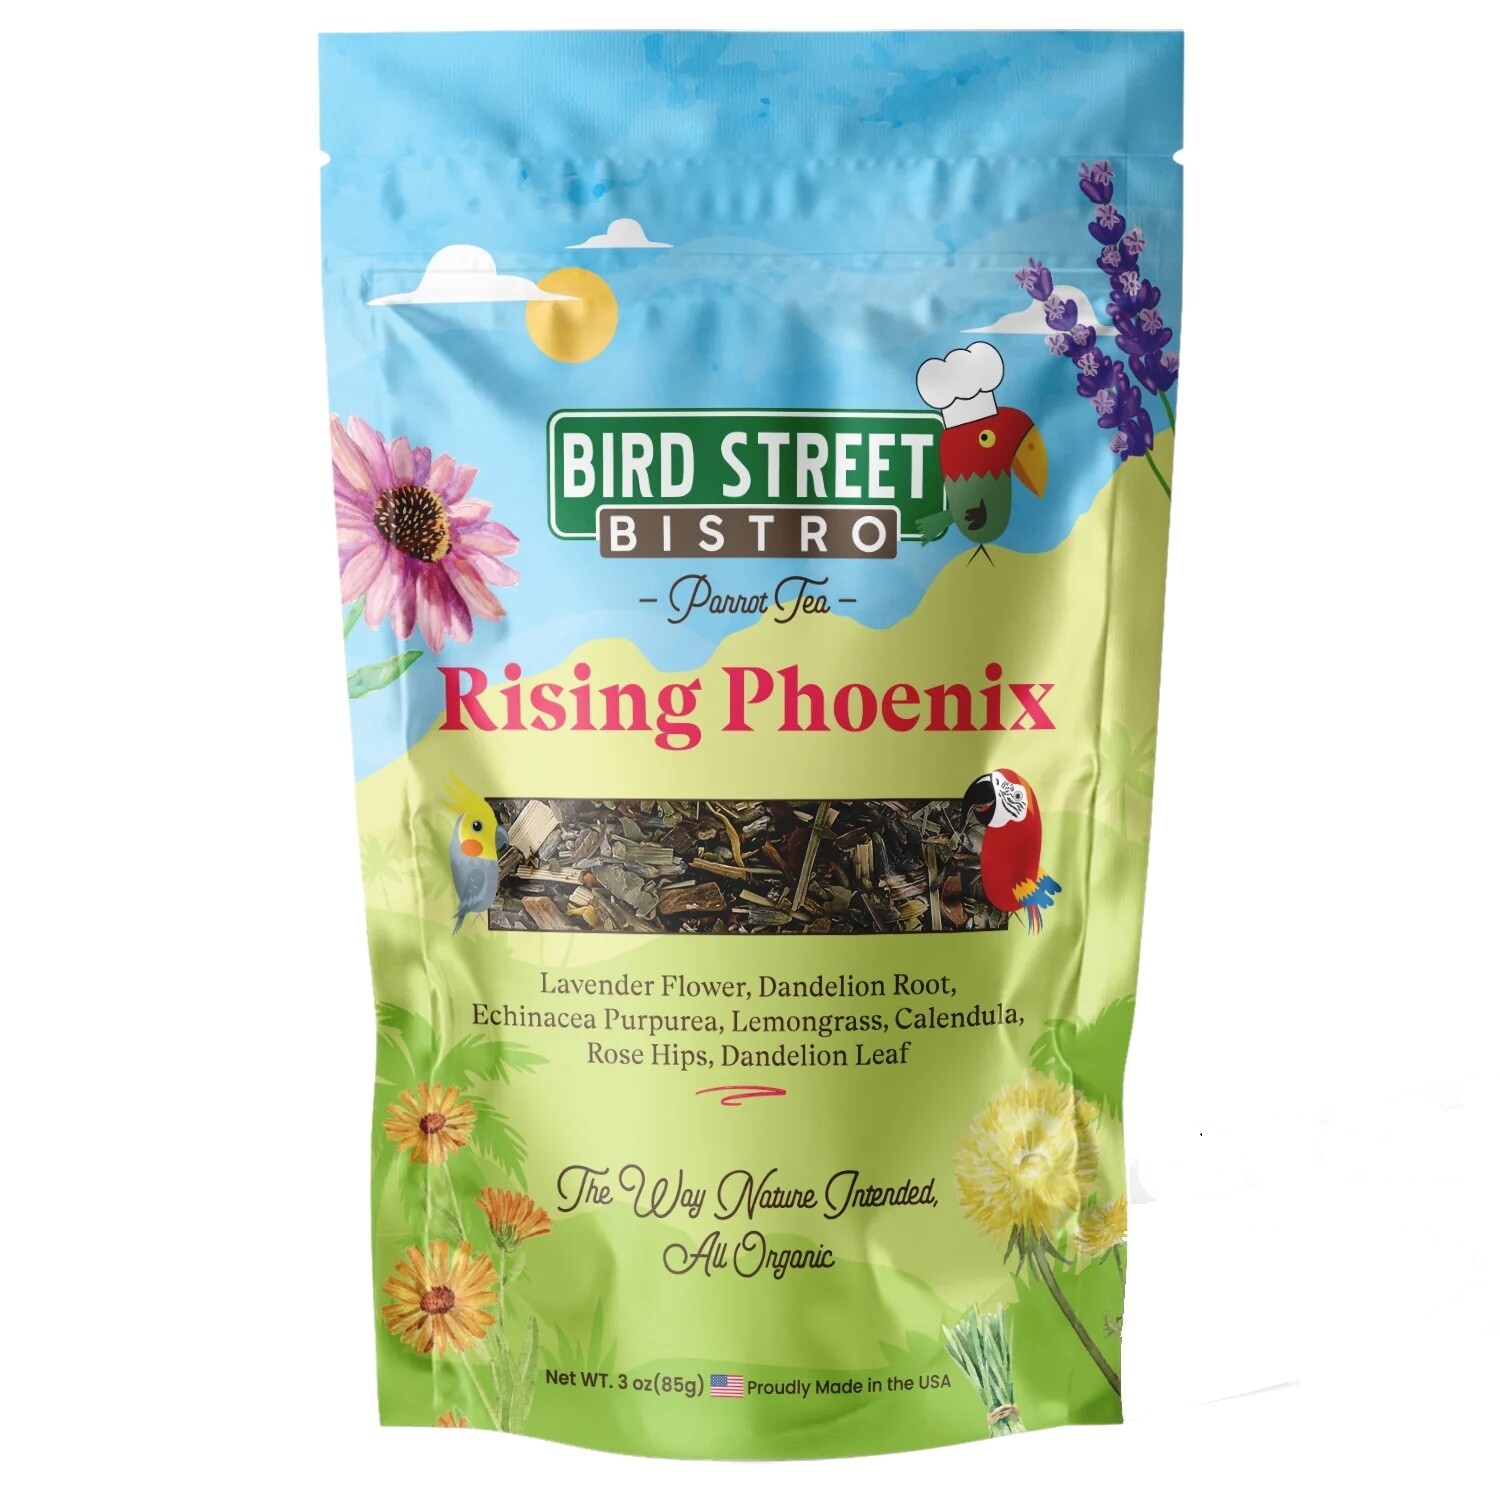 RISING PHOENIX - PARROT TEA 100% Organic, human grade healing herbs. Rising phoenix's mixture of organic herbal tea is specifically made for your feathered friend. Antiseptic and anti-inflammatory